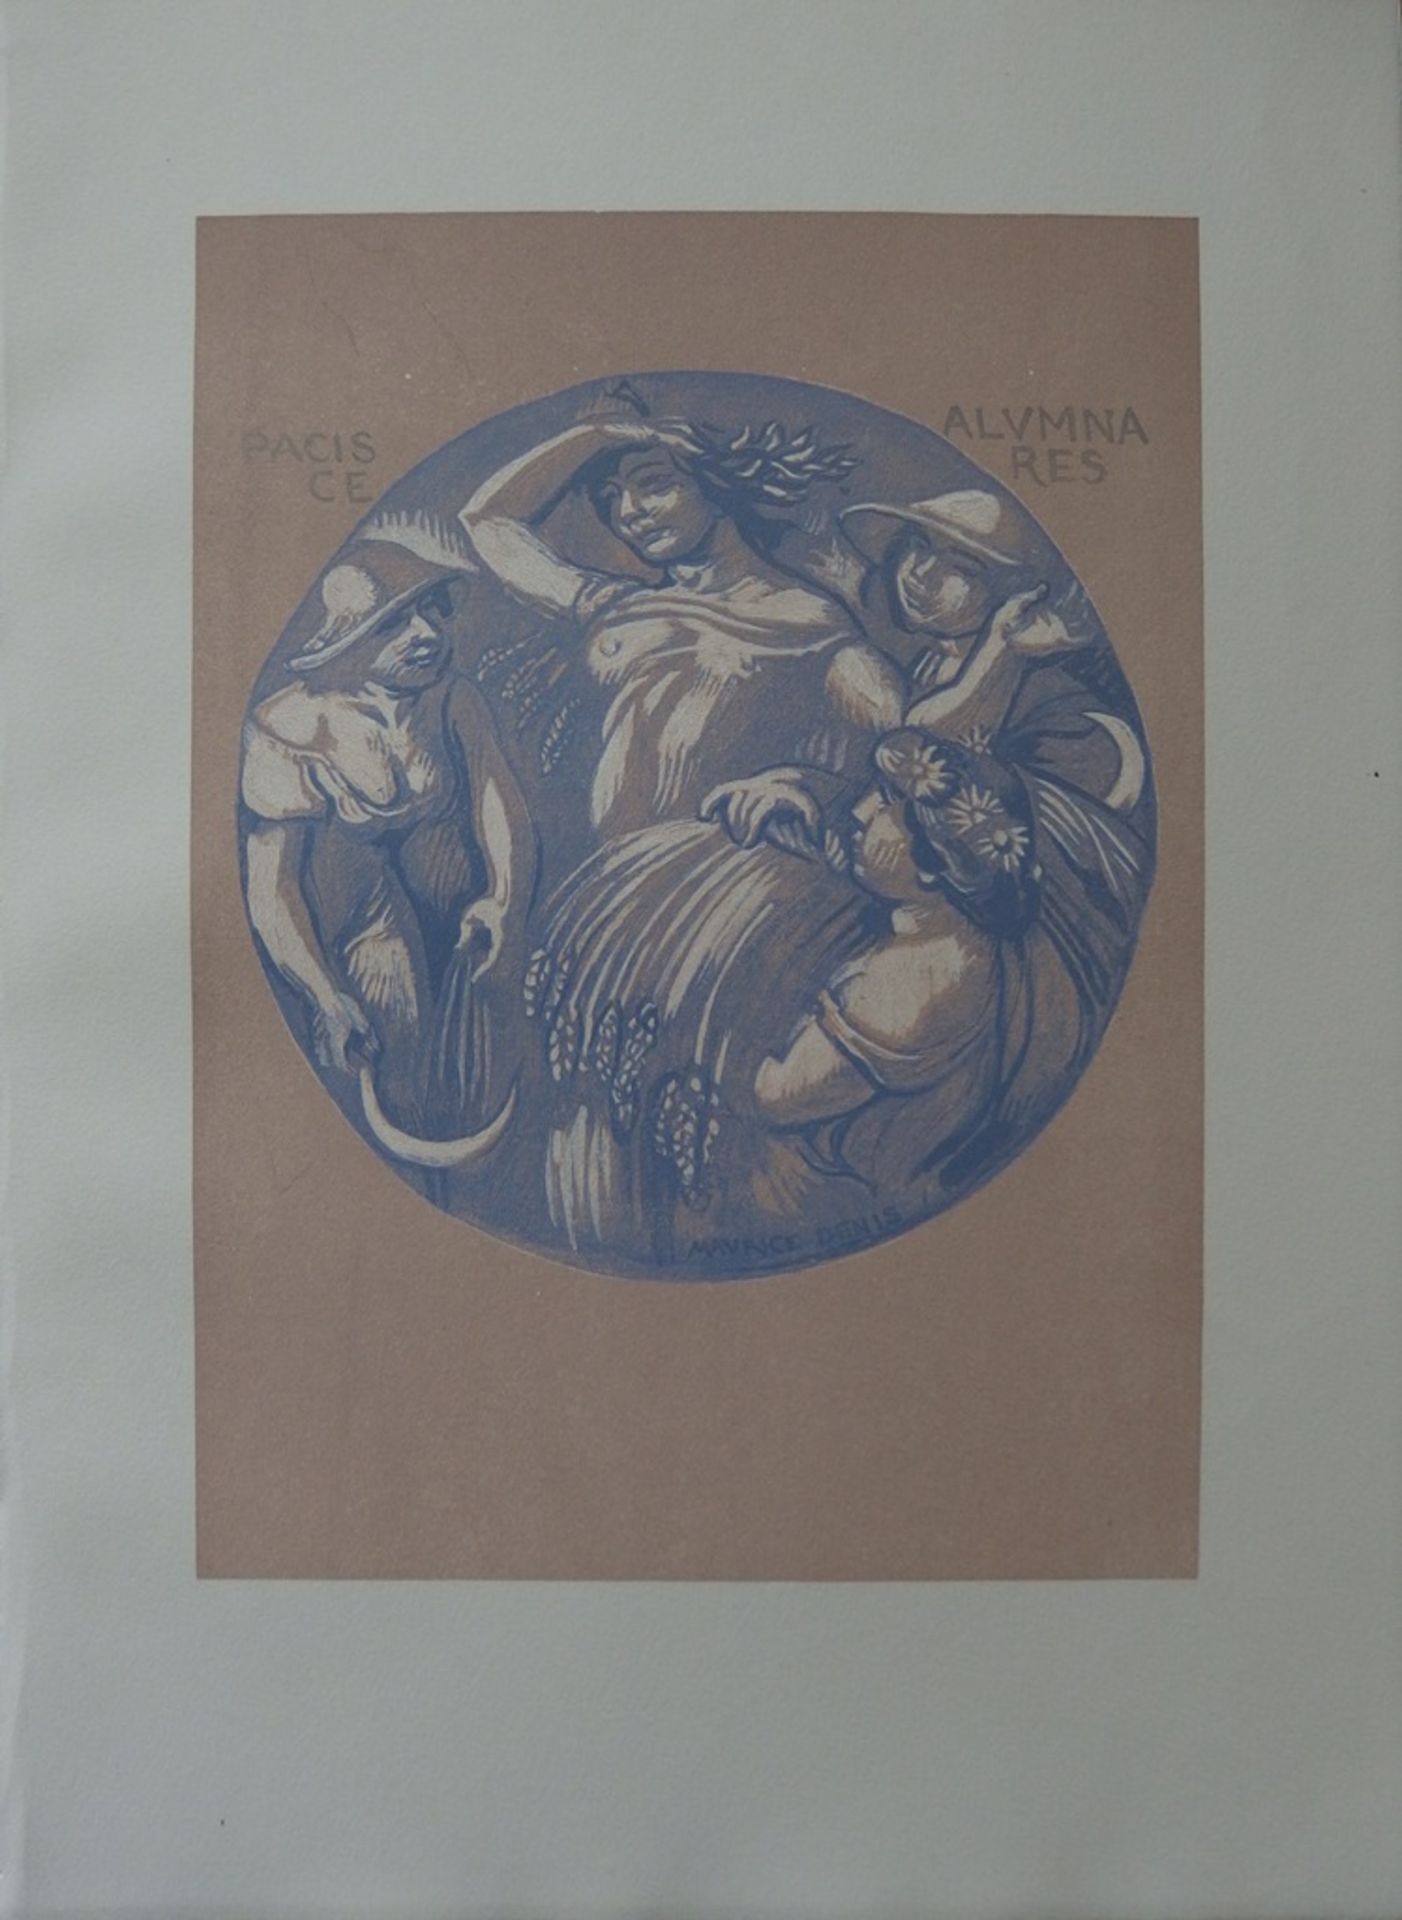 Maurice DENIS The peace and Ceres Woodcut on Vellum Arches paper Signed in the [...]